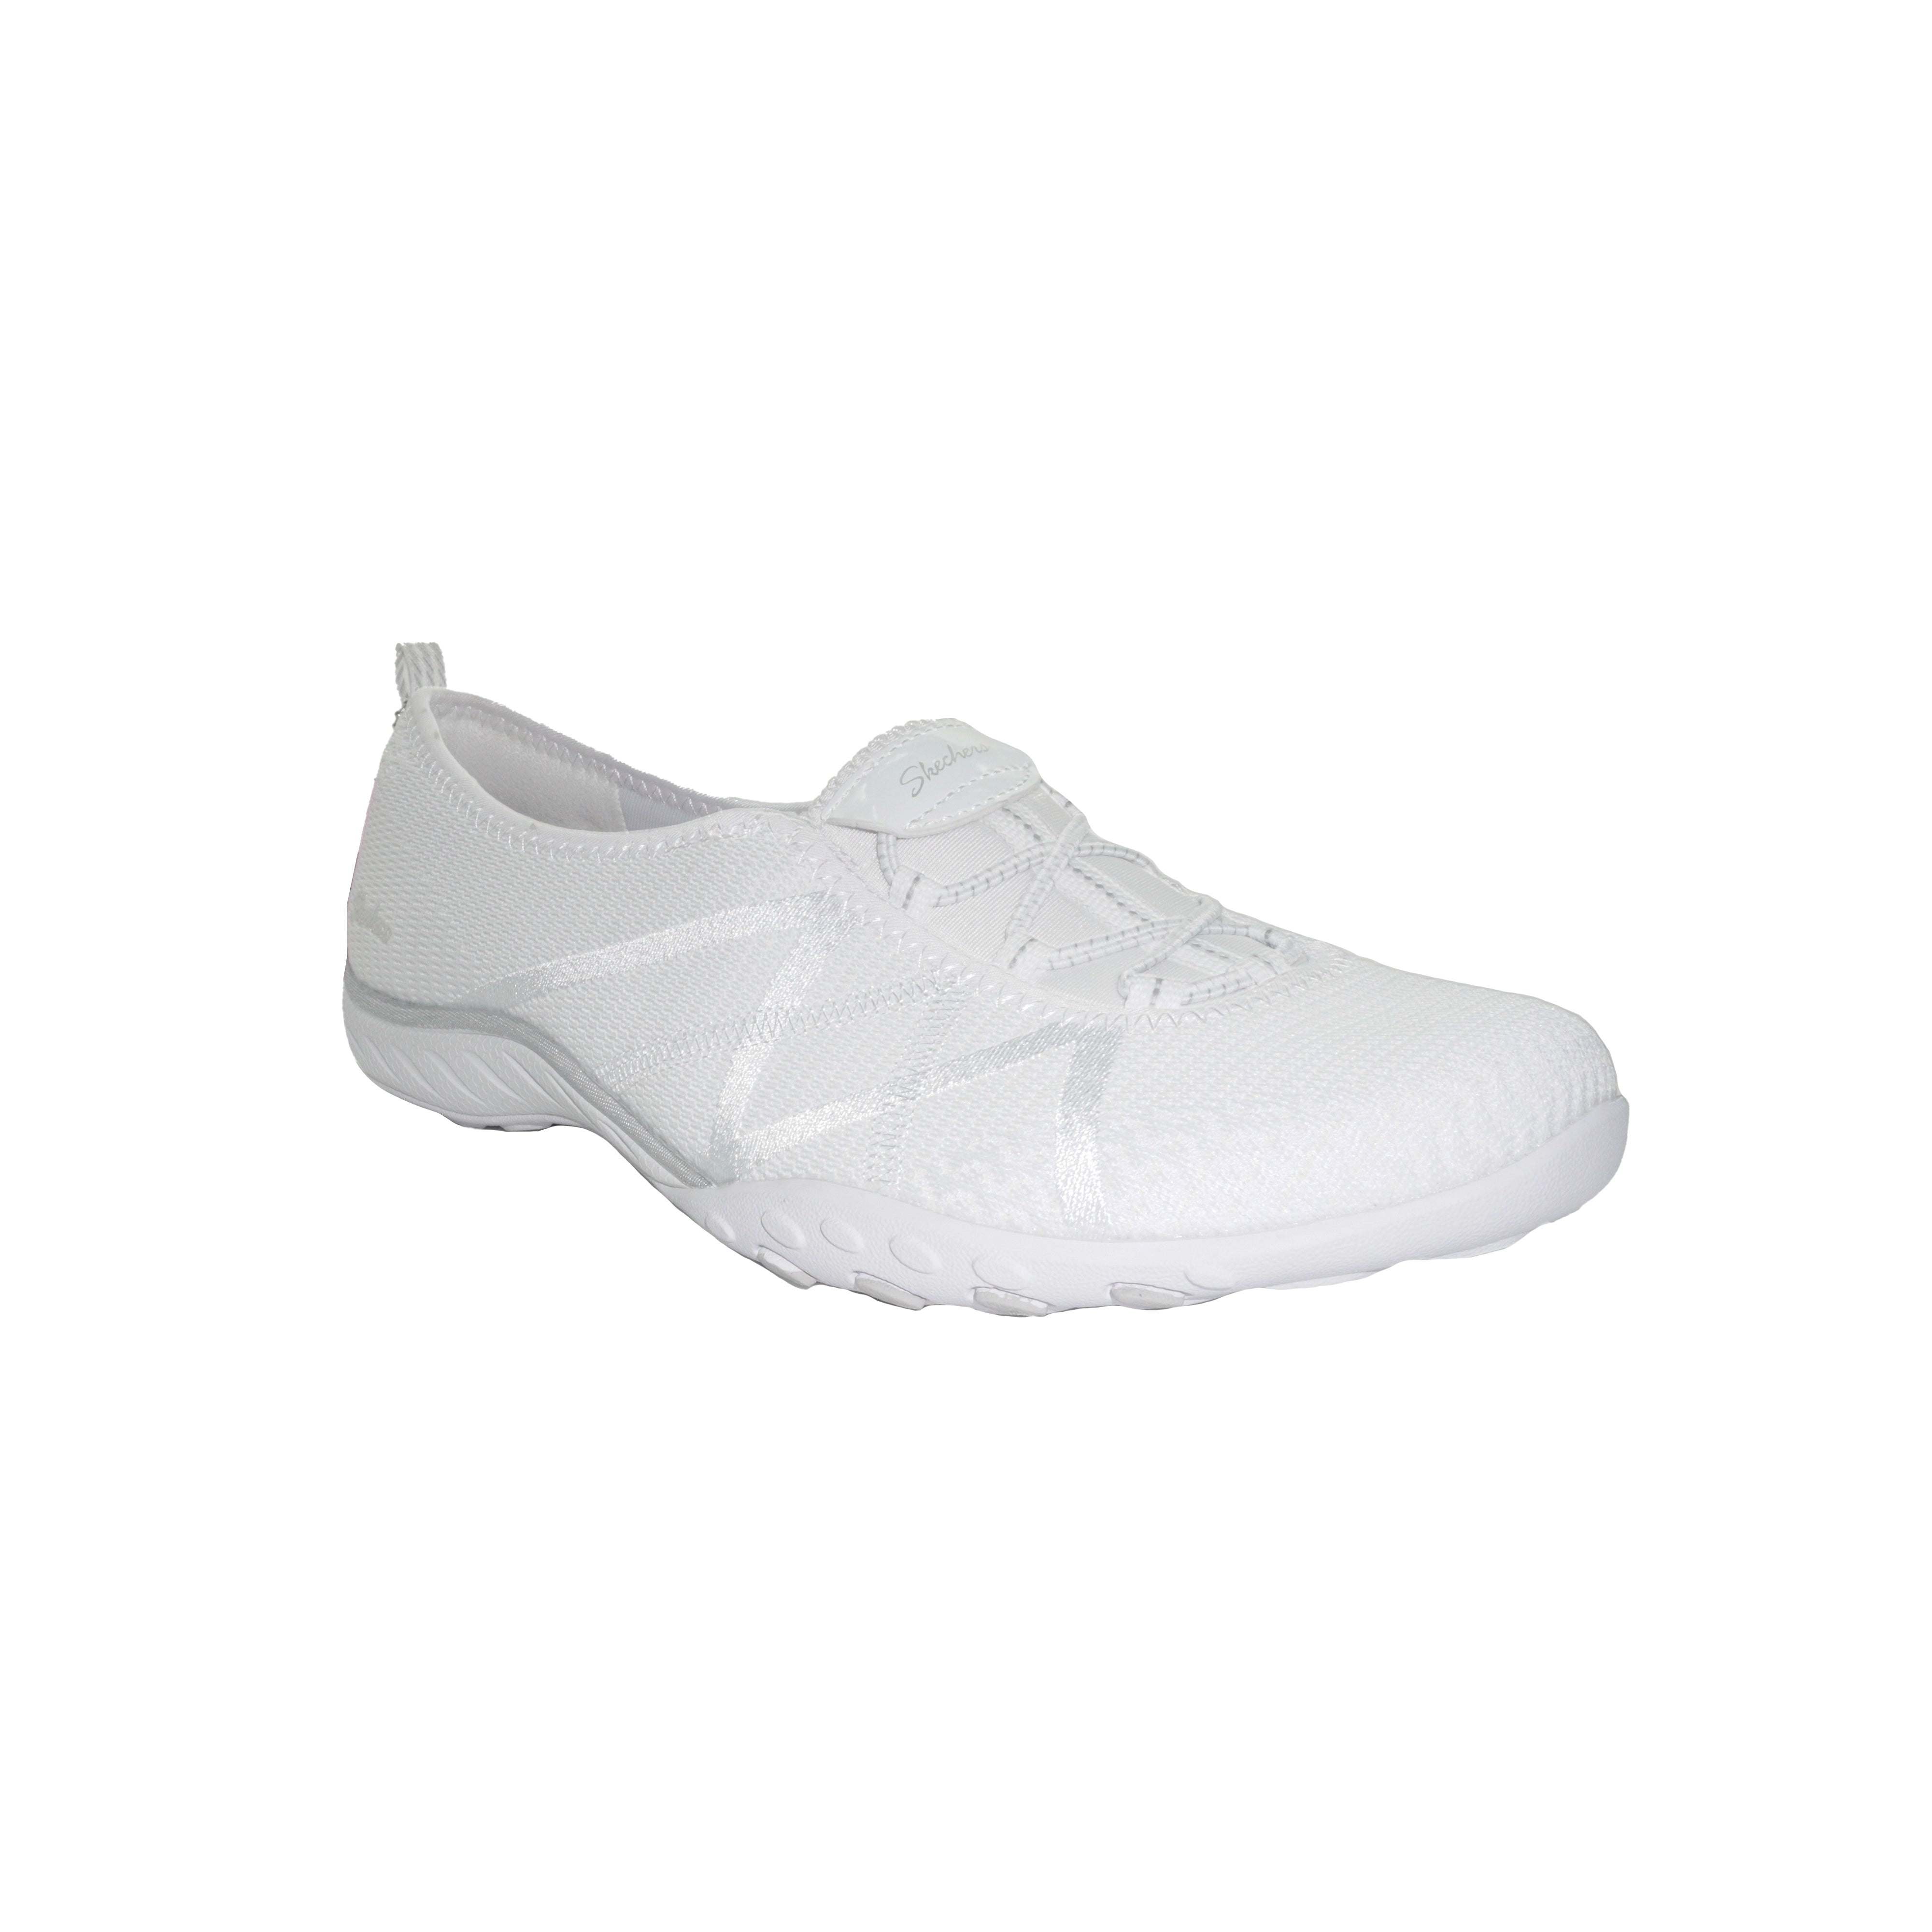 skechers air cooled memory foam relaxed fit womens